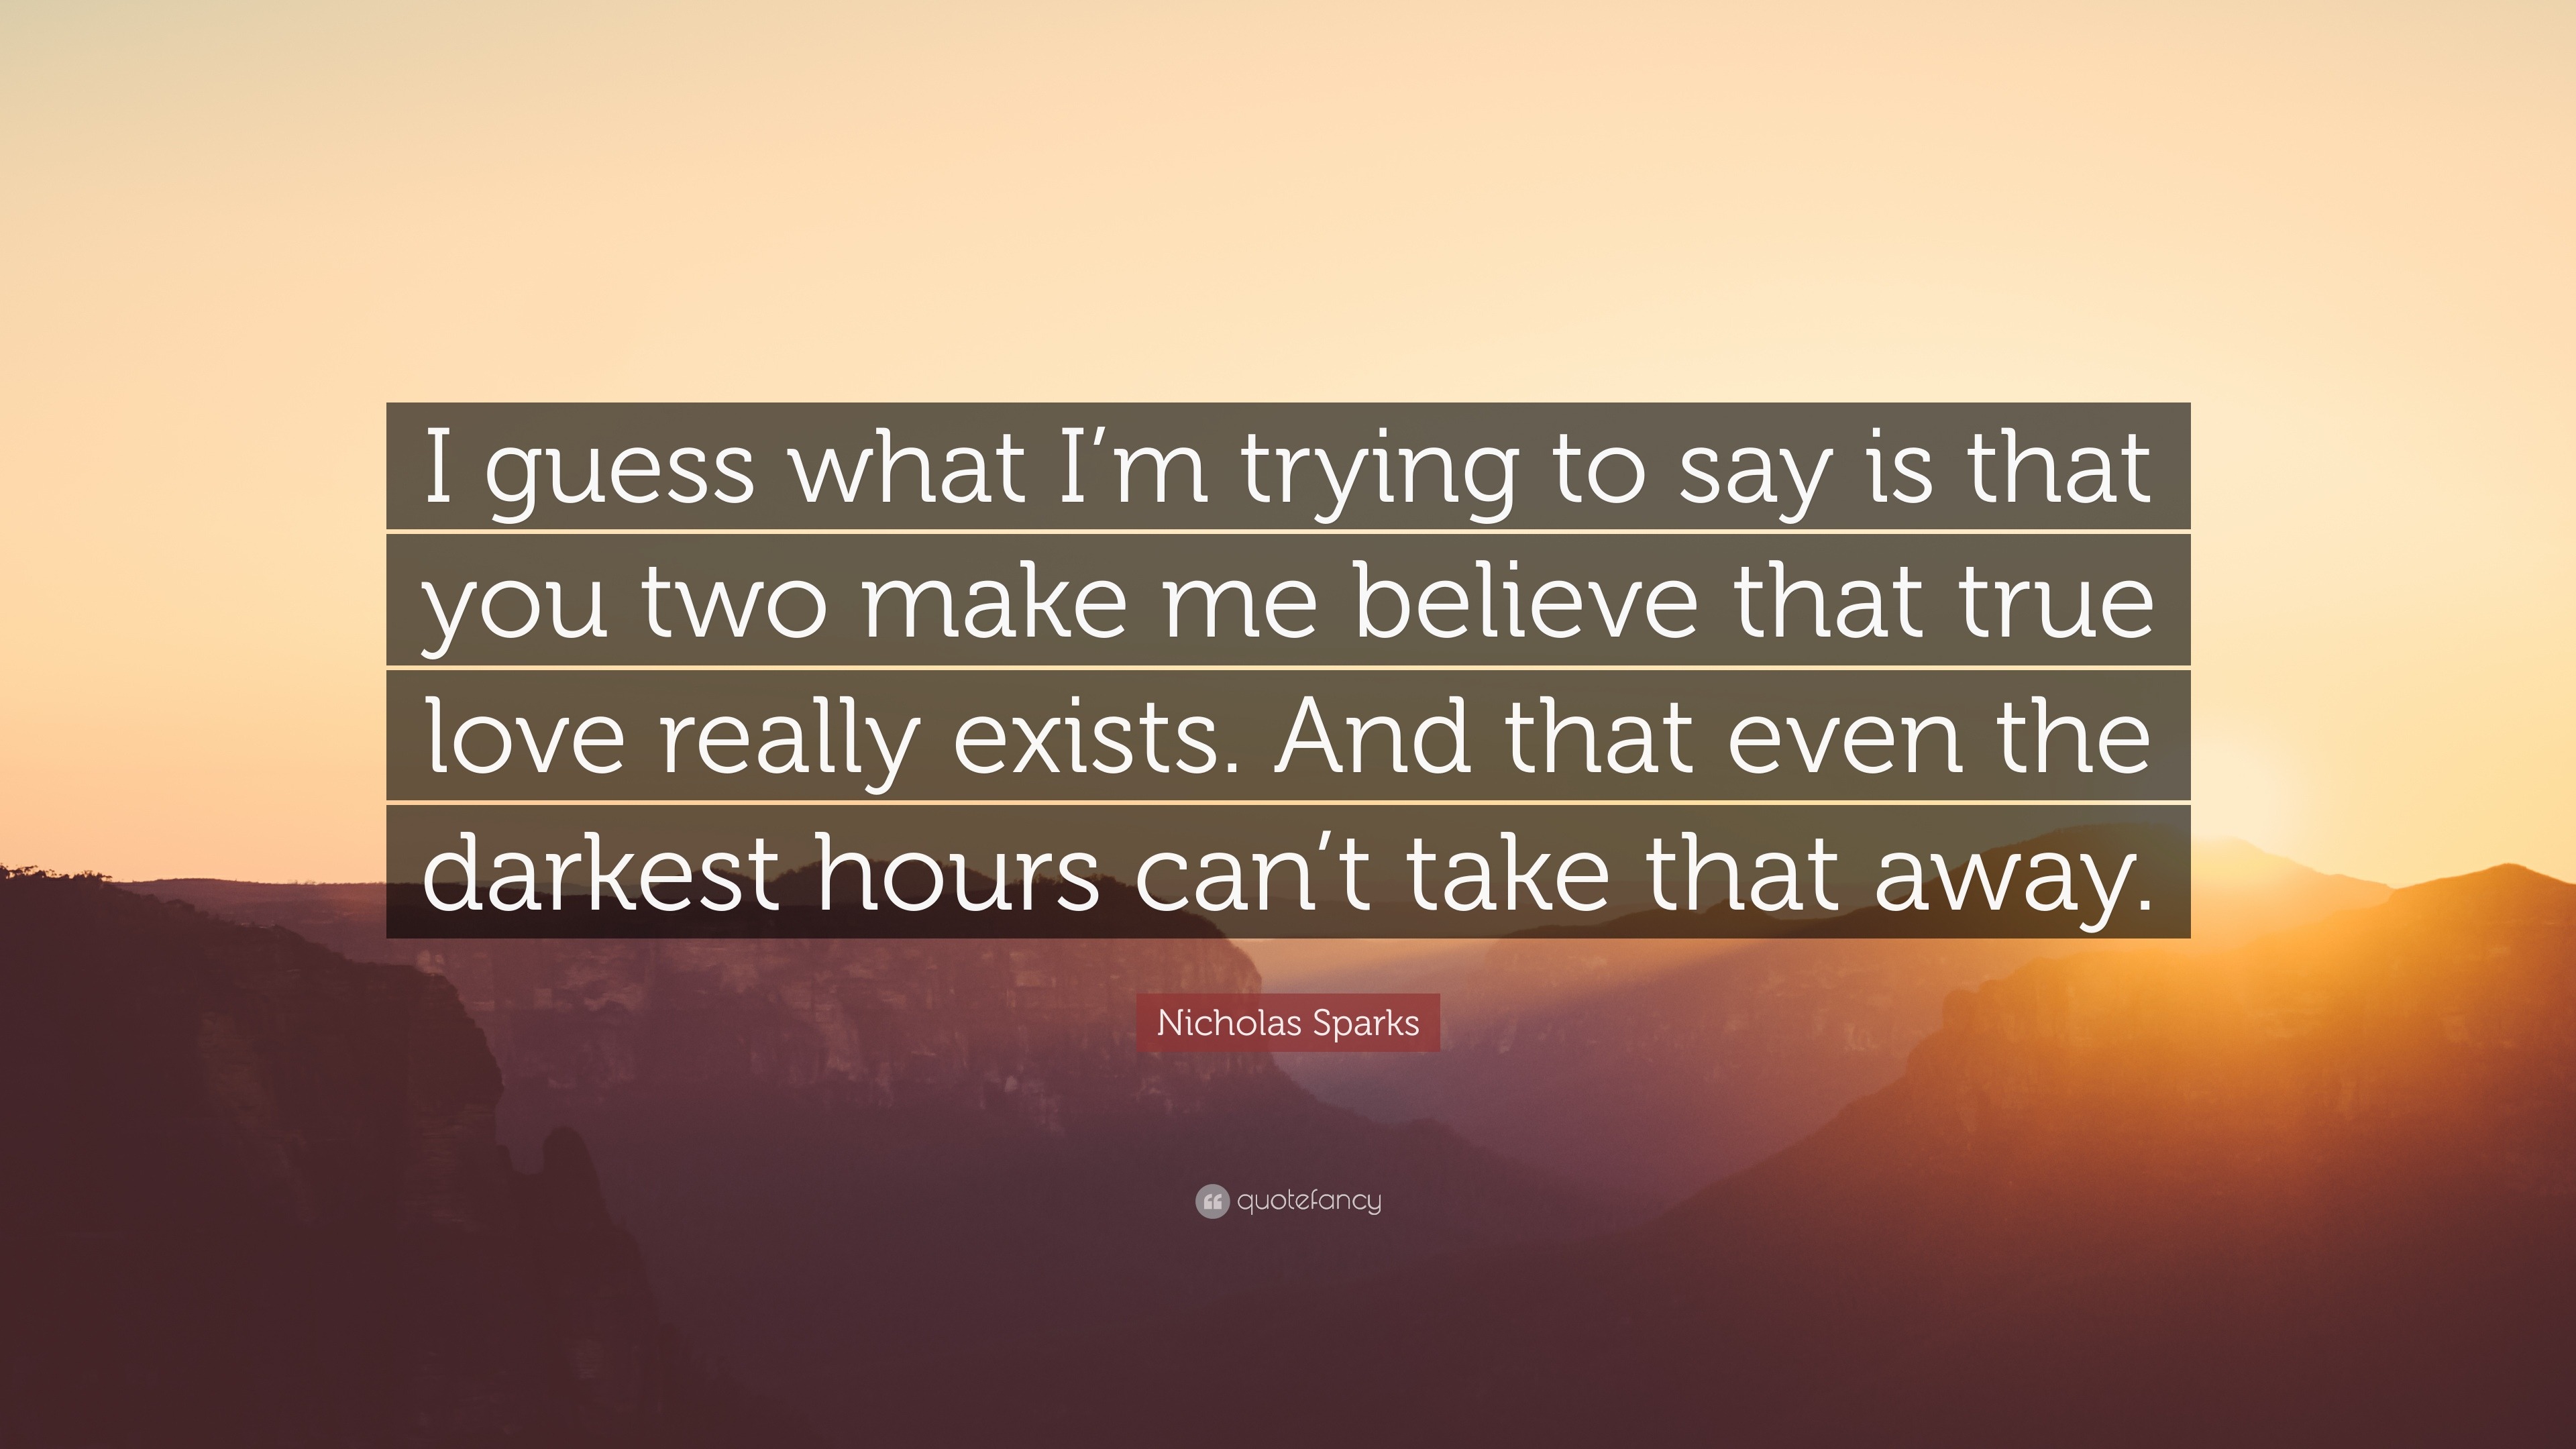 Nicholas Sparks Quote “I guess what I m trying to say is that